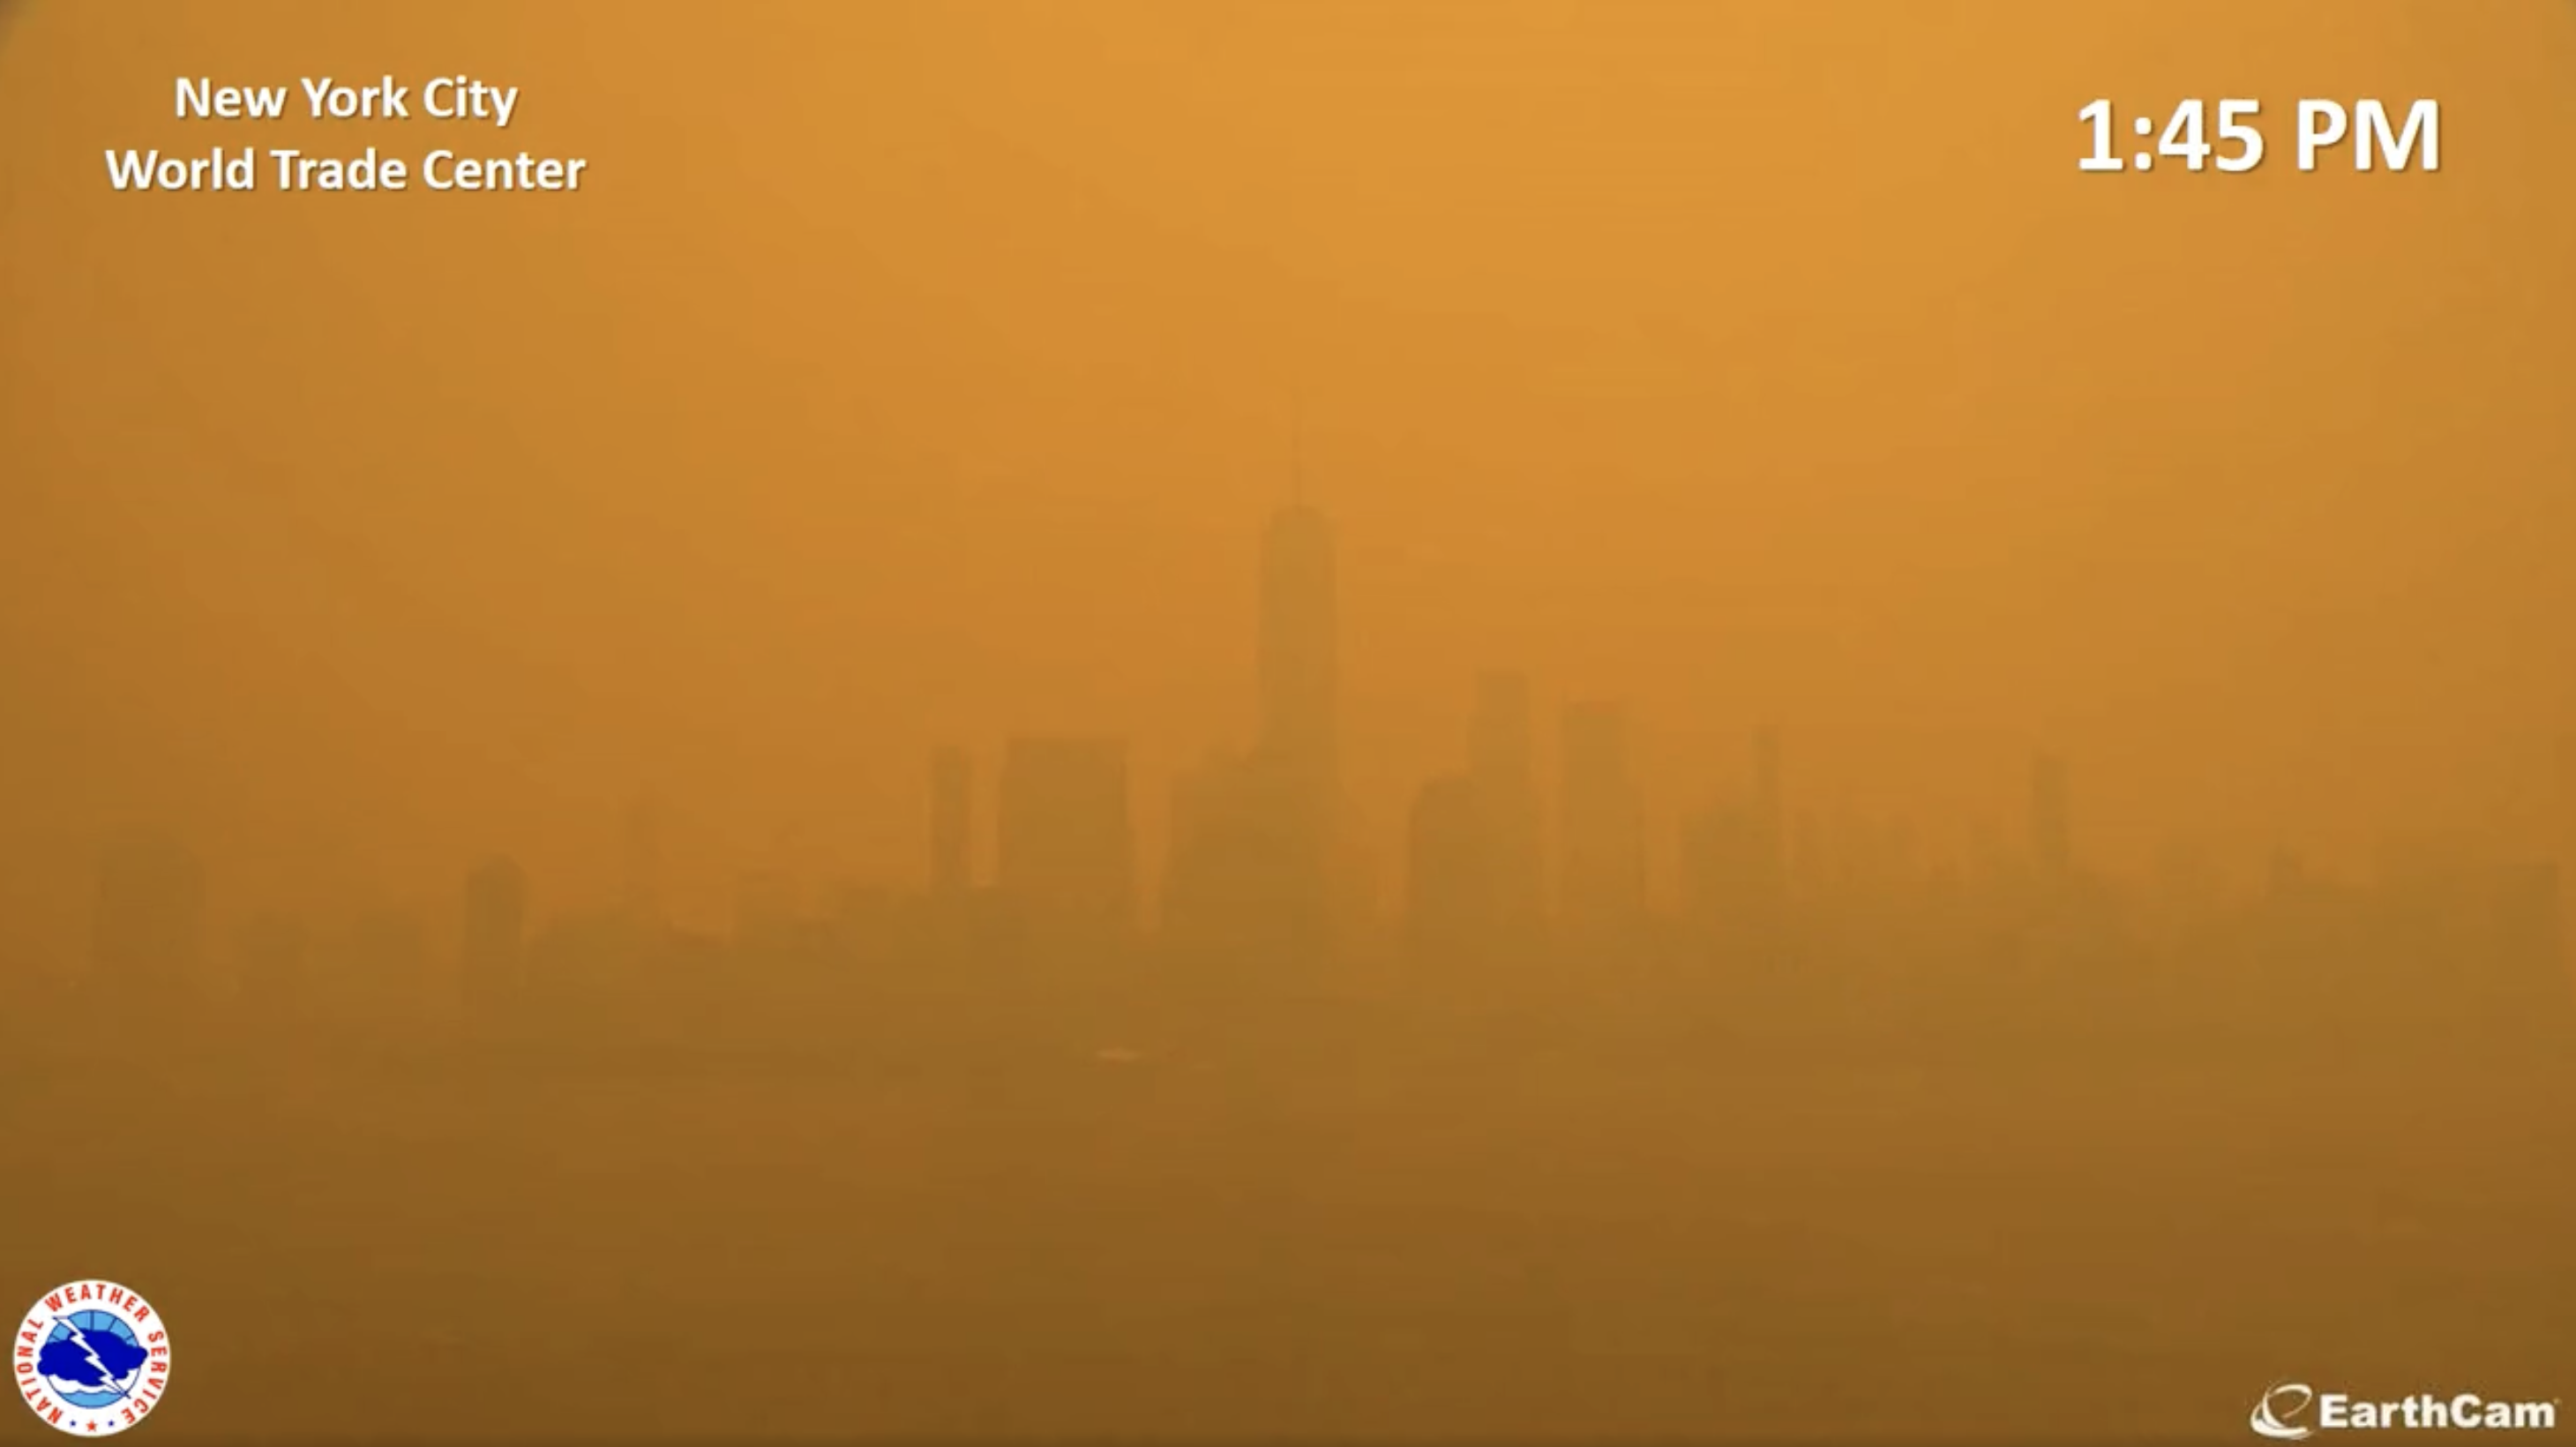 View of the downtown Manhattan skyline at 1:45 pm, with the sky a much deeper orange